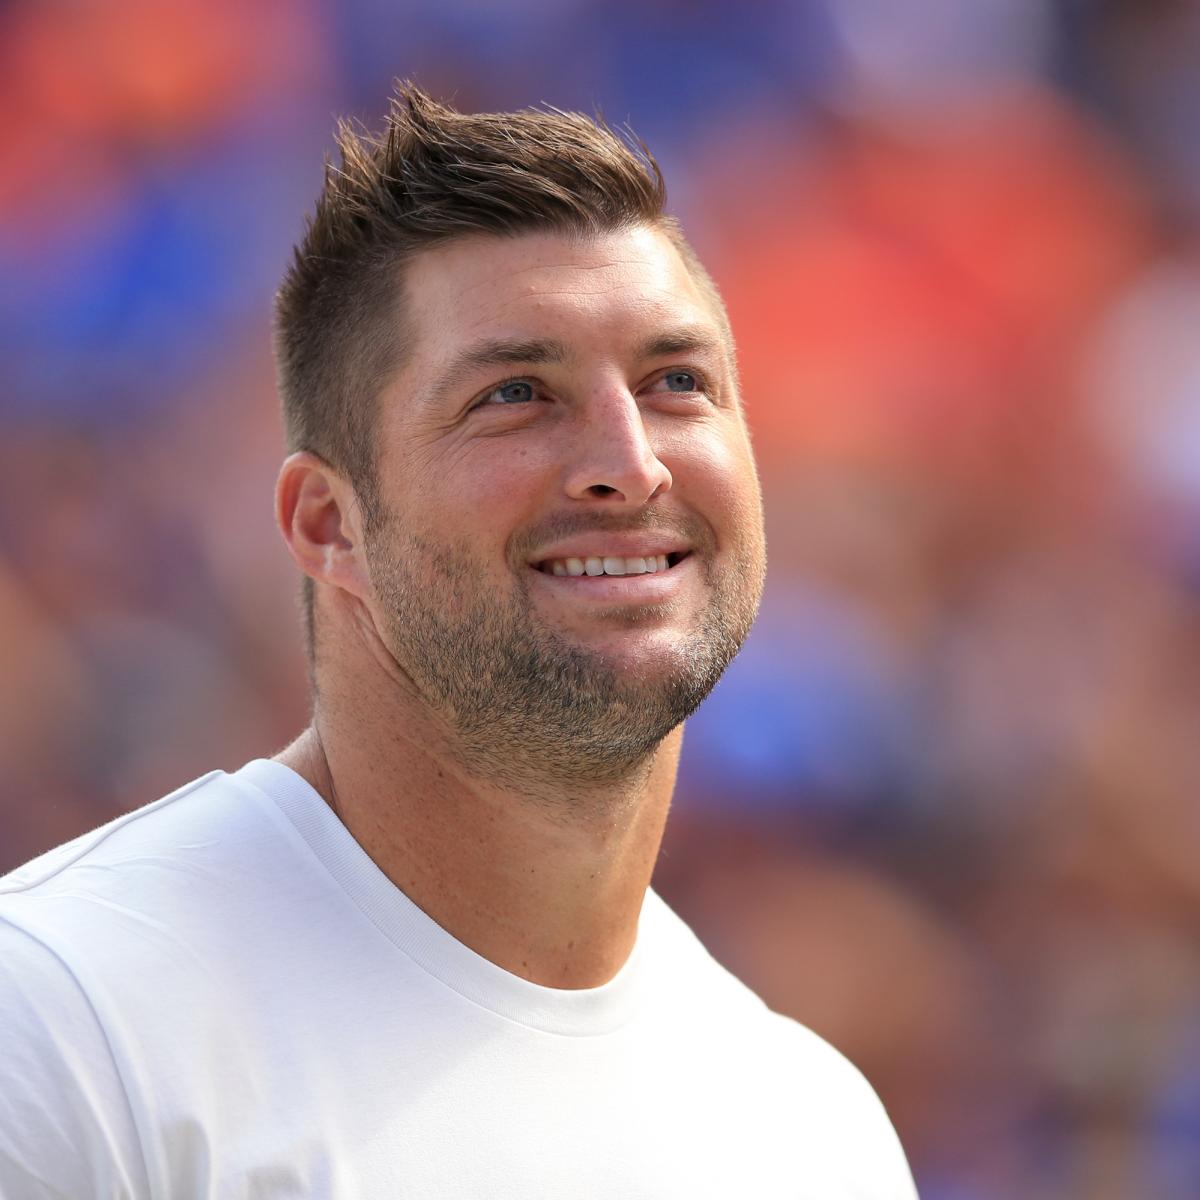 College Football Flashback Tim Tebow Scores 7 Times in One Game  News